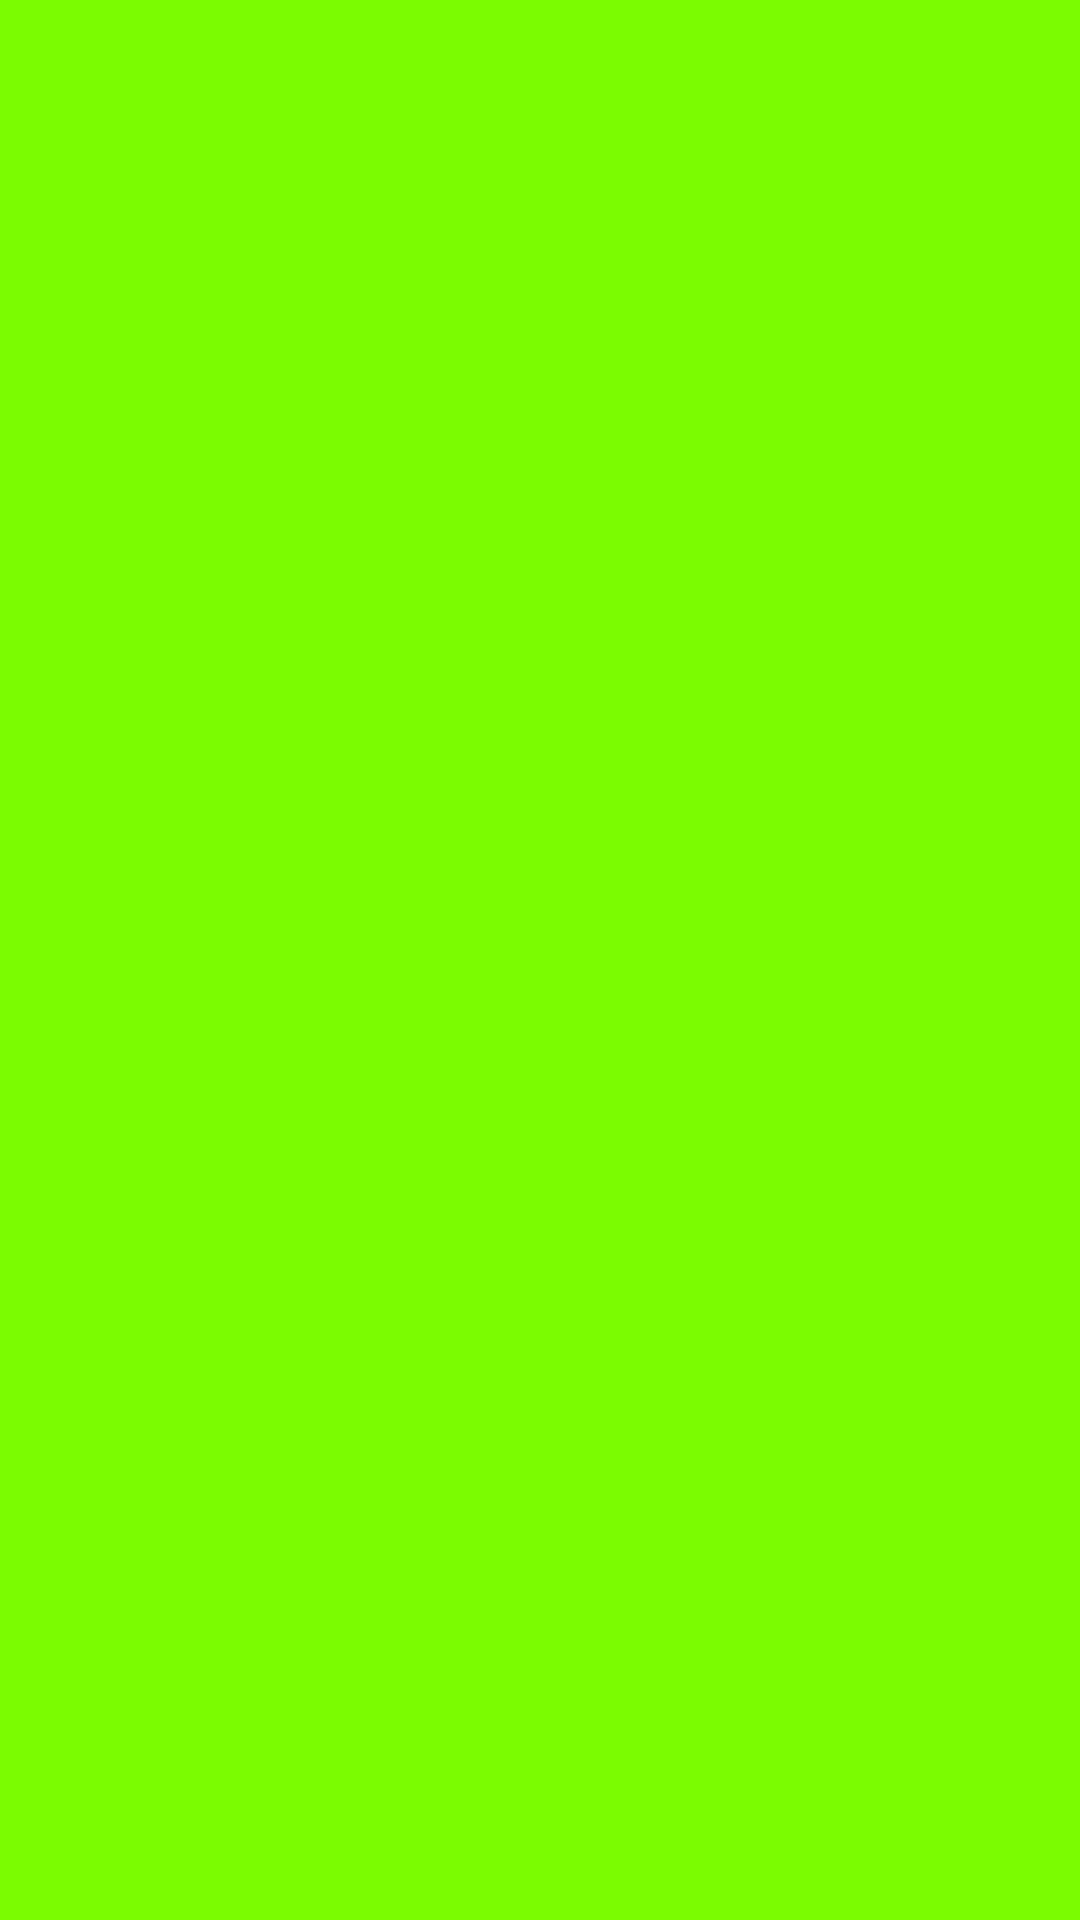 1080x1920 Lawn Green Solid Color Background